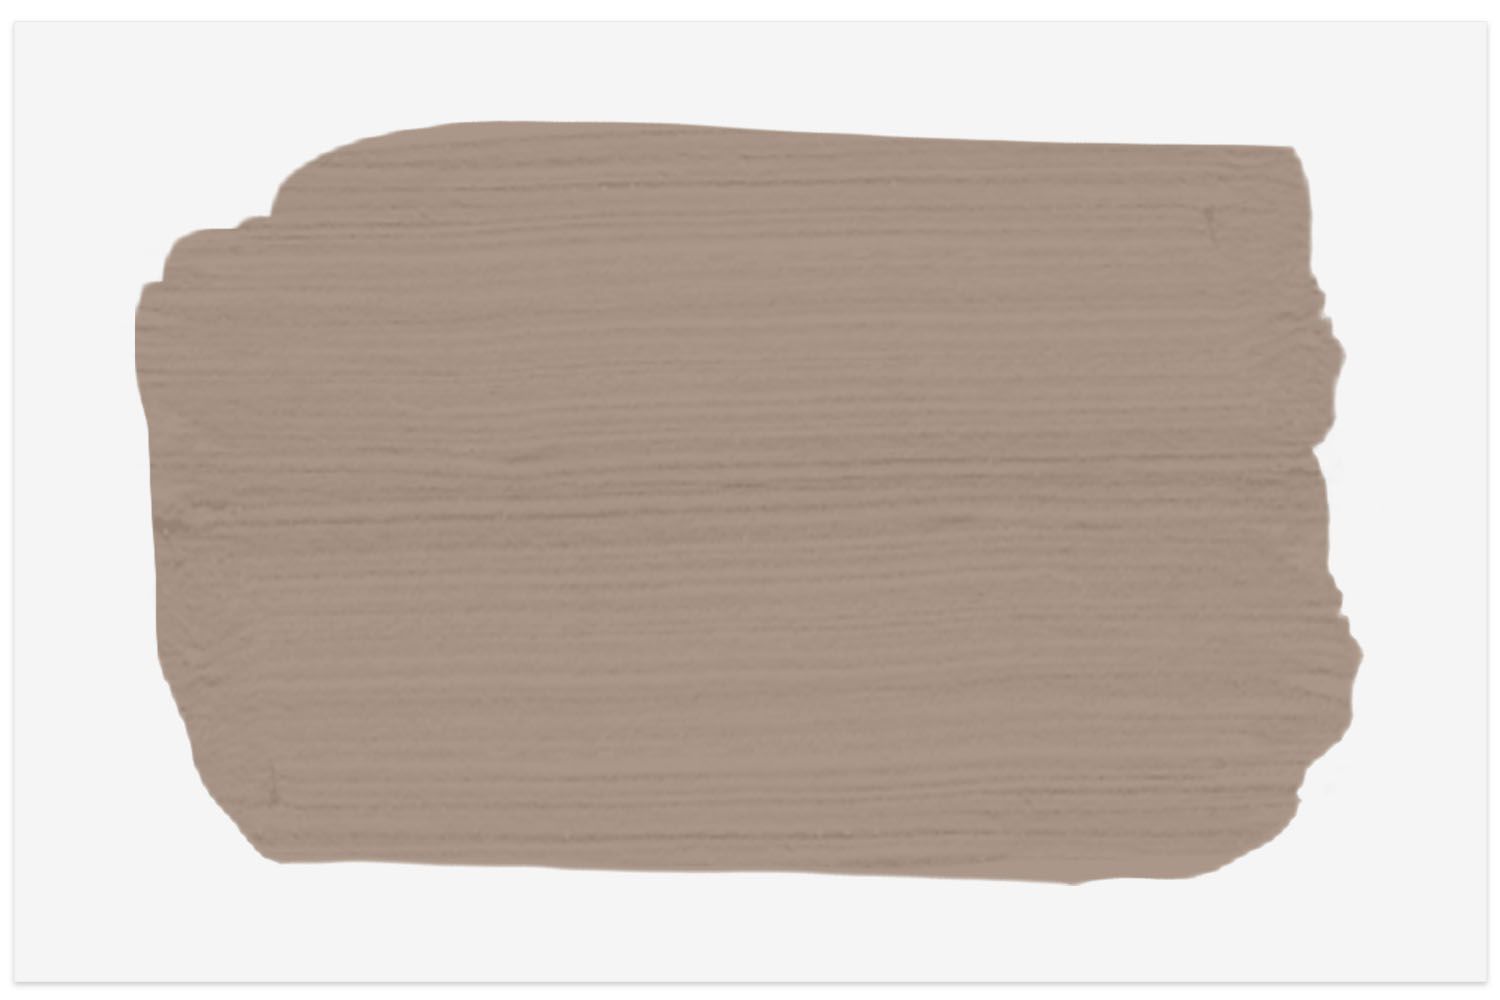 Behr Chic Taupe paint swatch